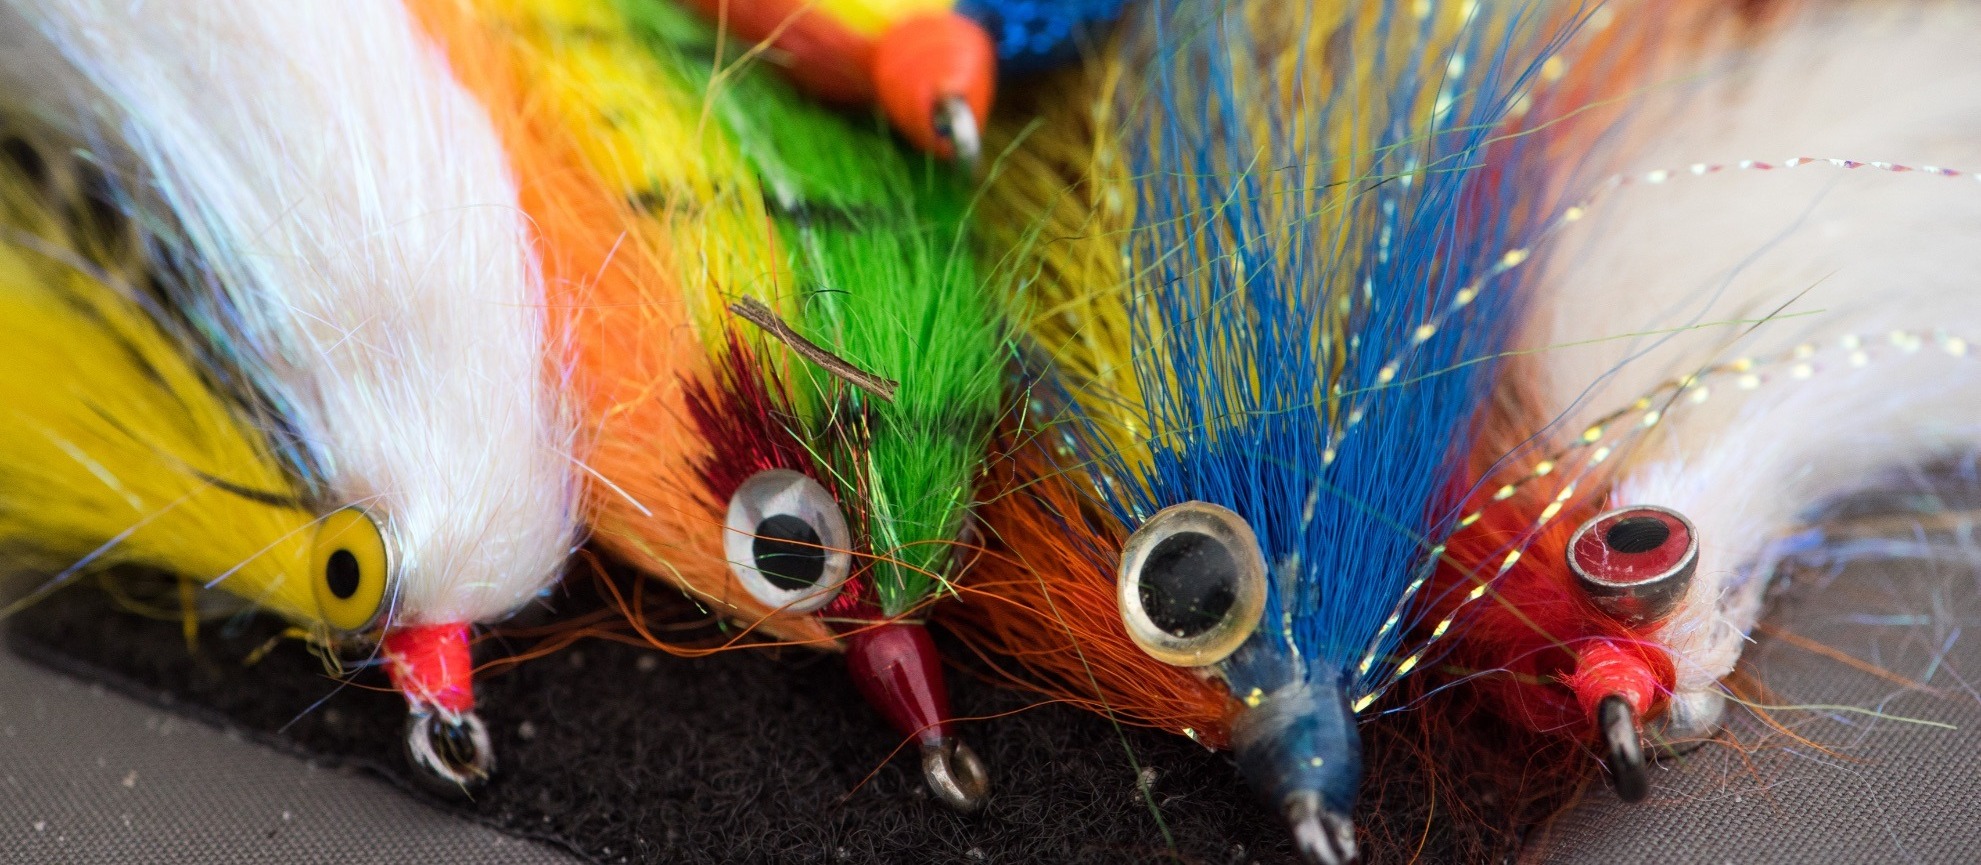 Top 15 Peacock Bass Flies for Fly Fishing